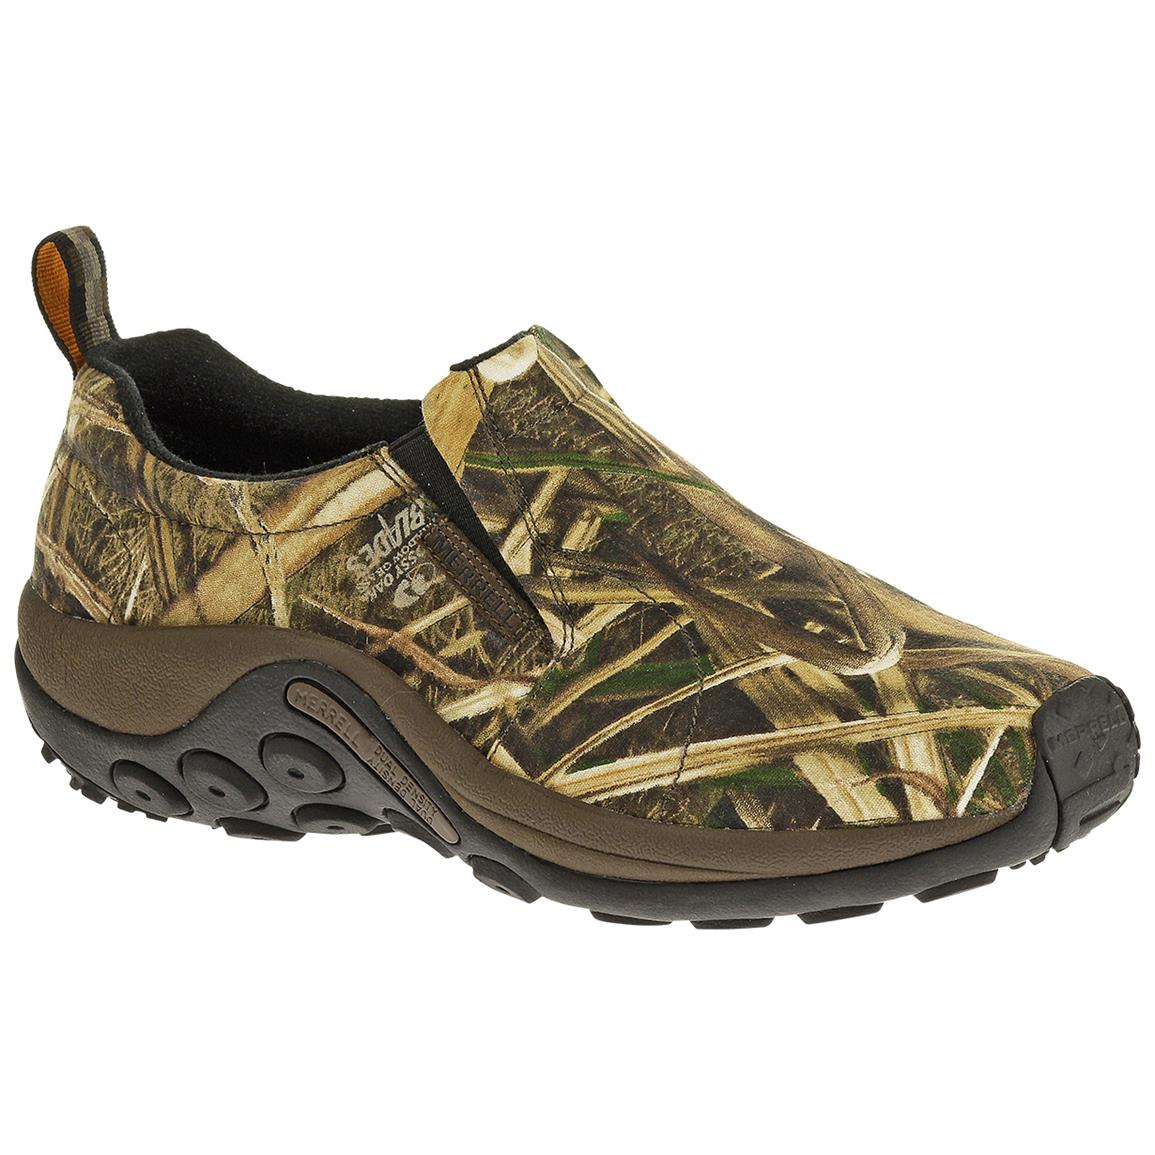 Merrell Jungle Moc Camo Shoes - 617452, Casual Shoes at Sportsman's Guide